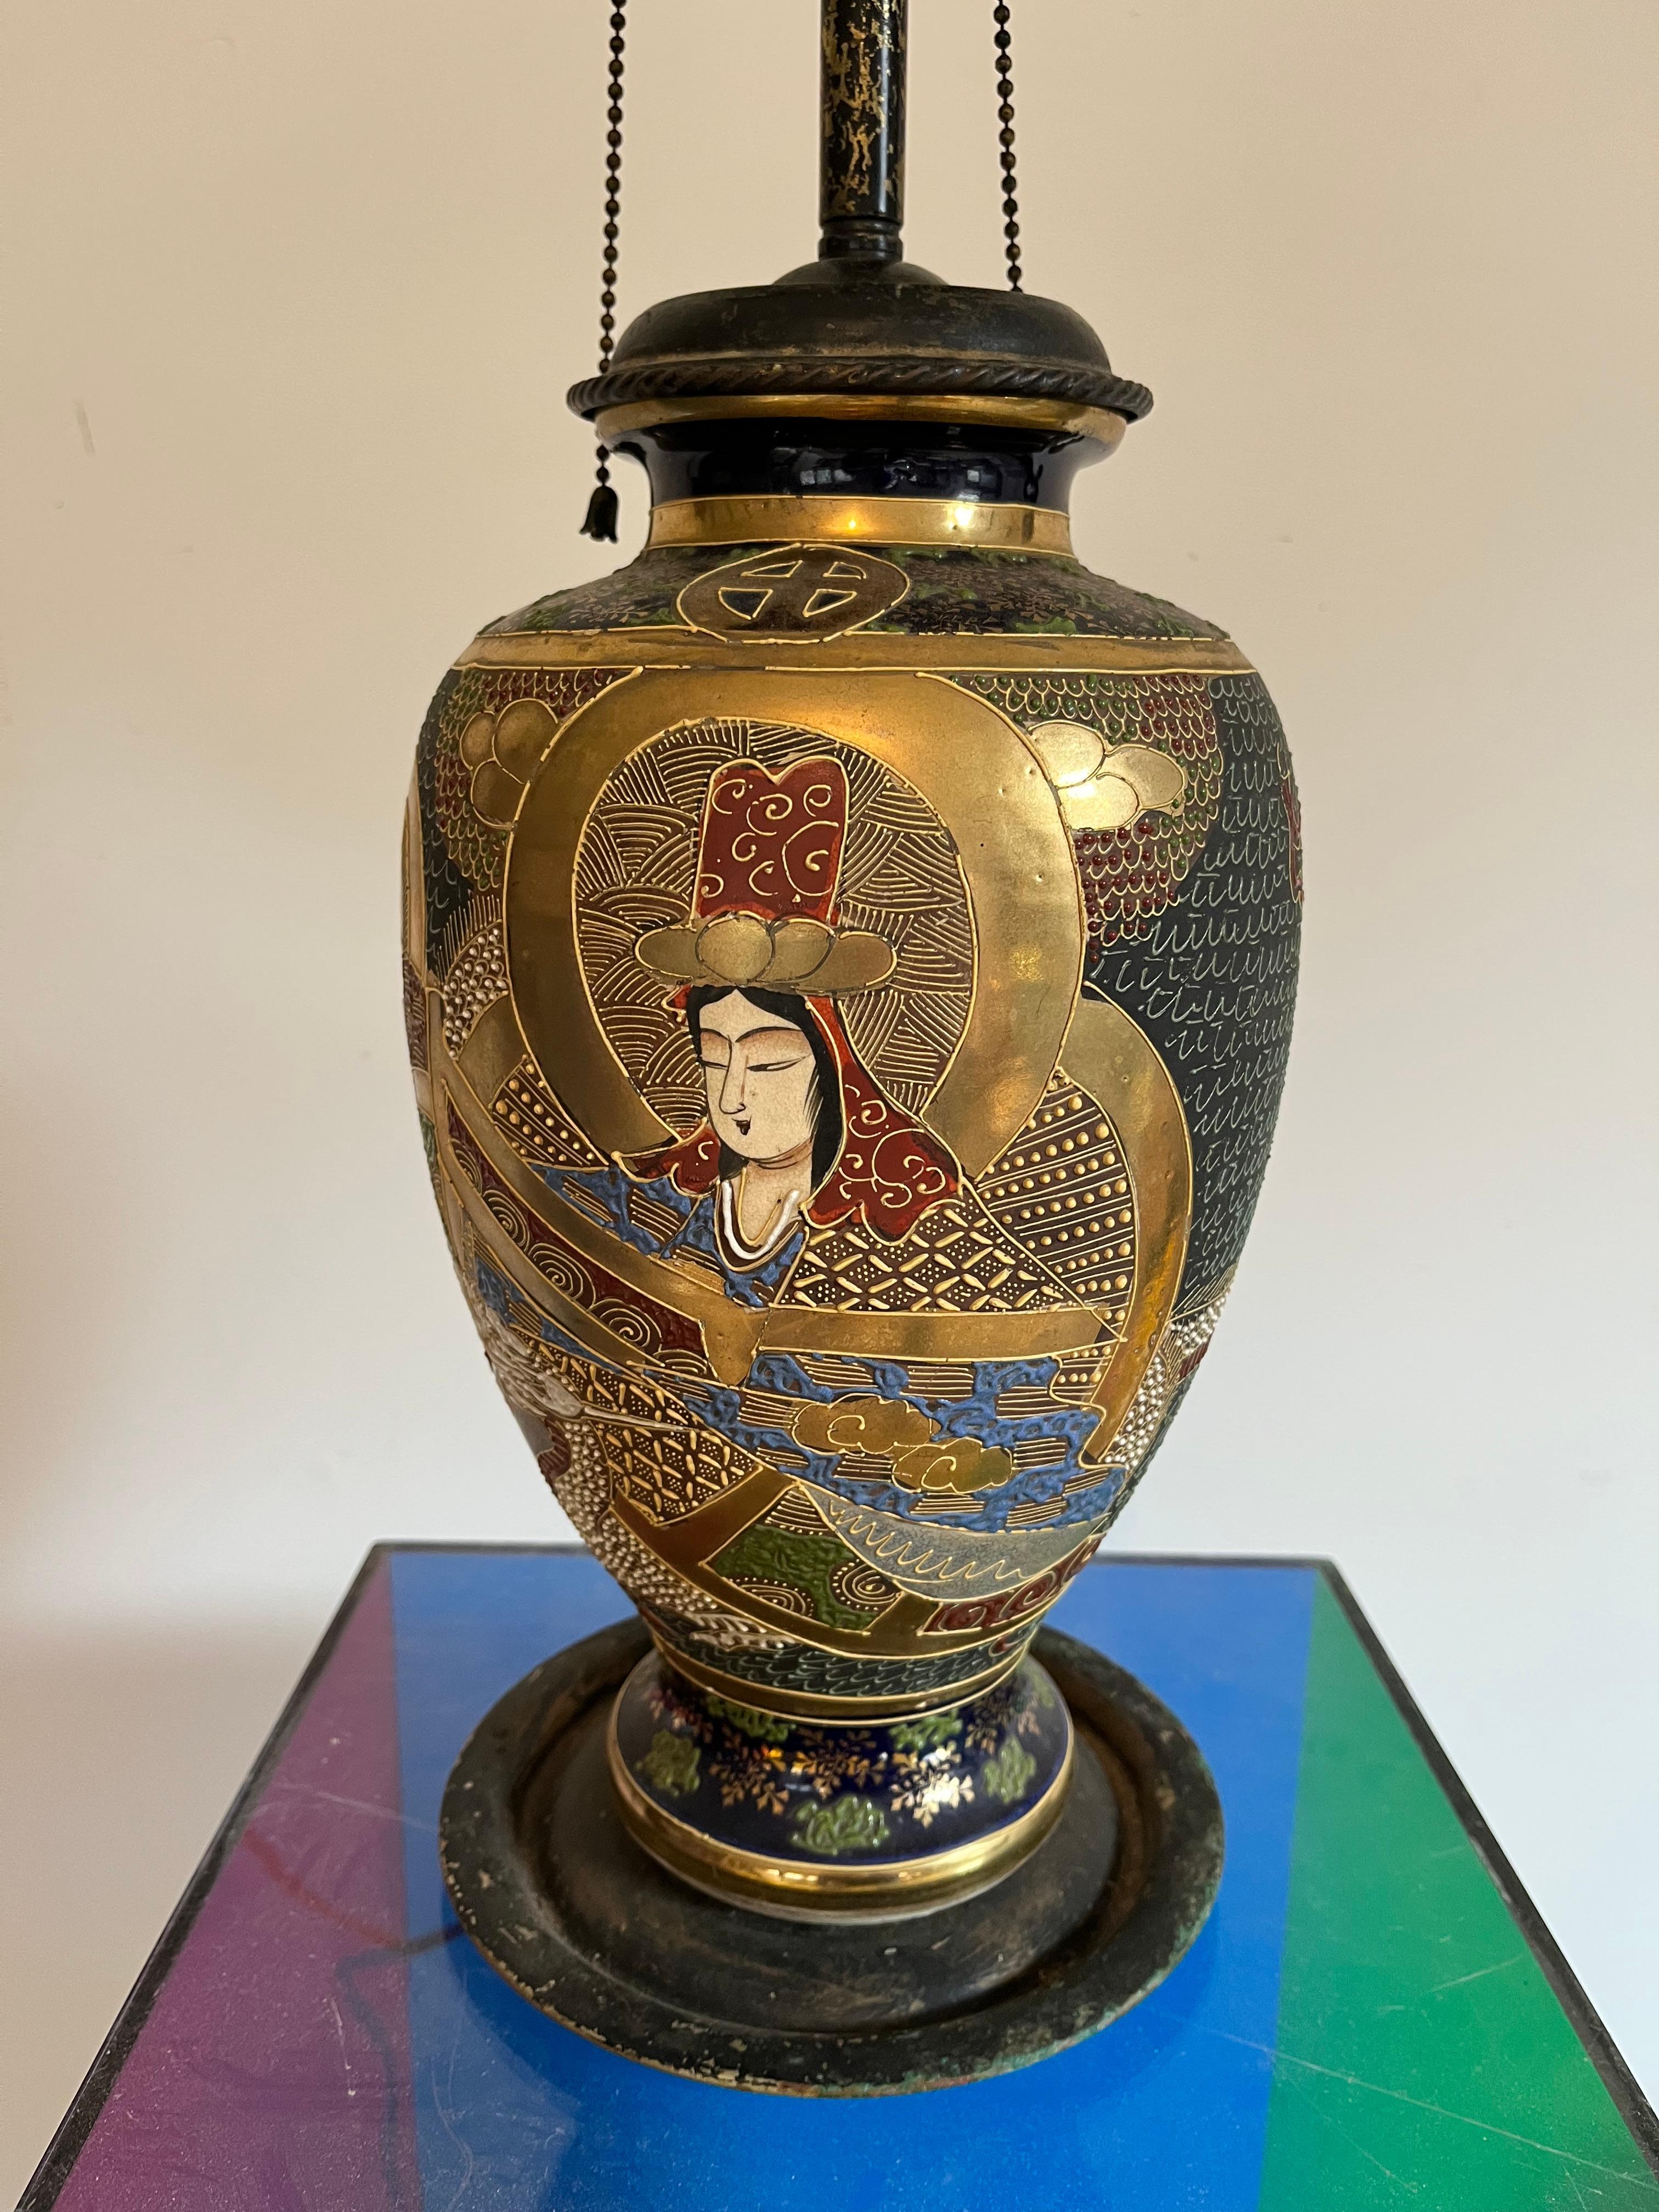 An early Satsuma vase depicting a Japanese nobleman and woman on two panels front and back, with gilt decoration and painted details overall. Now mounted as a lamp. 